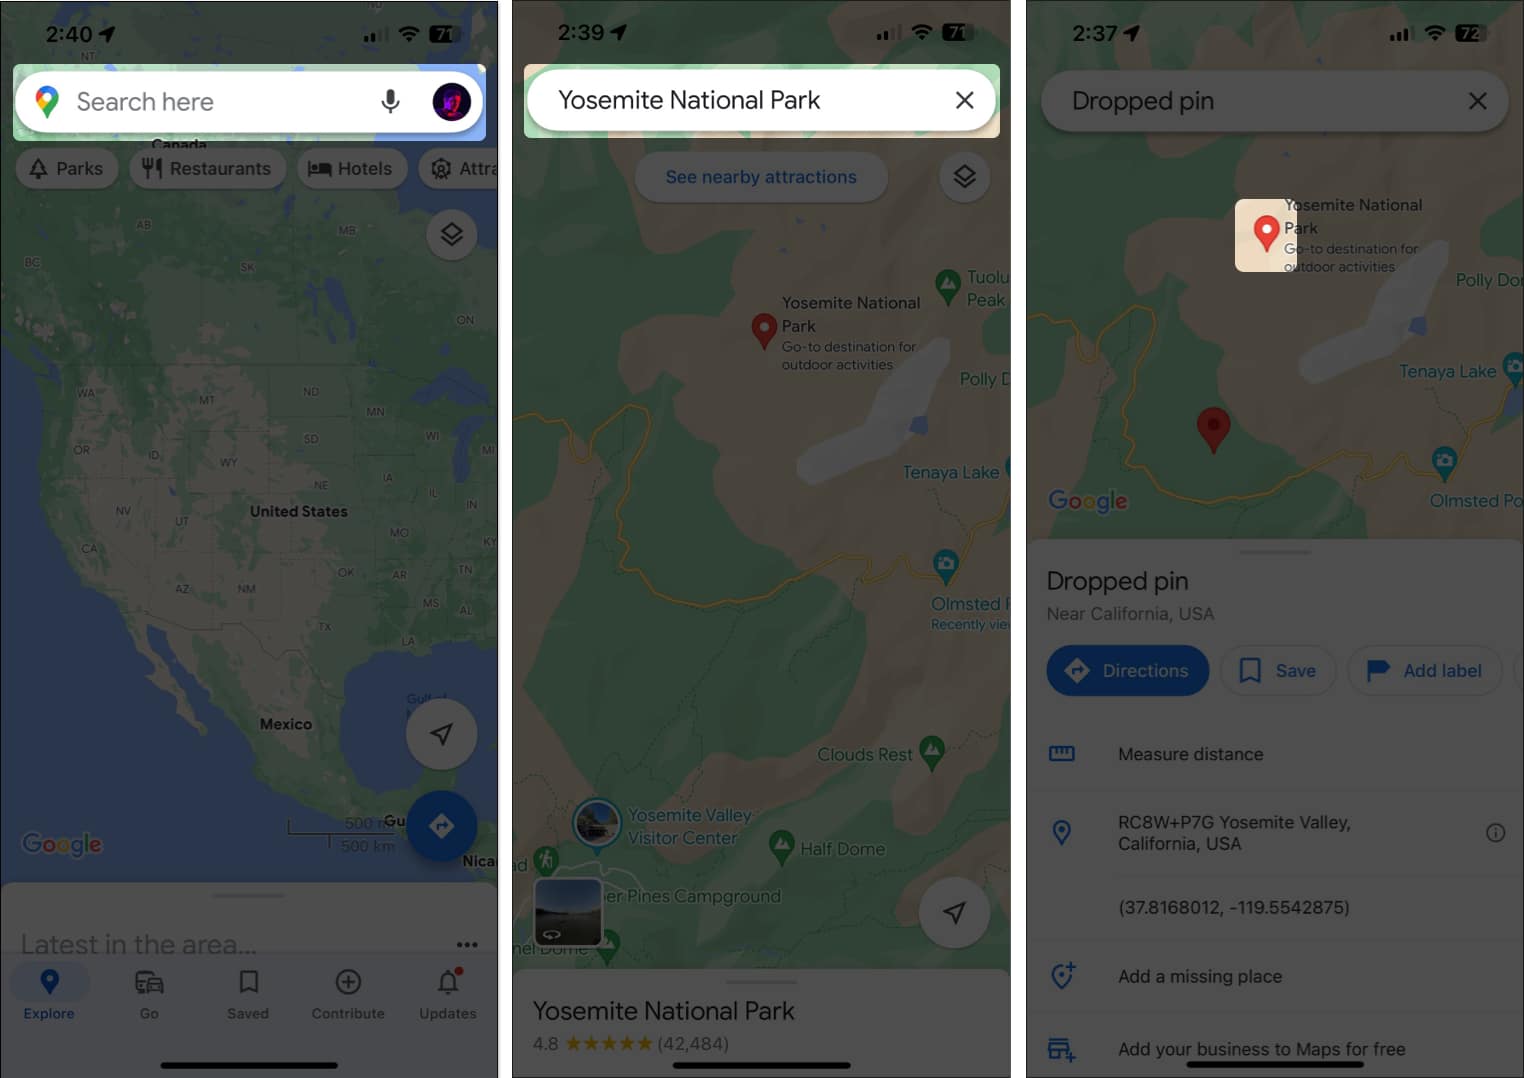 How to drop a pin in Google Maps on iPhone